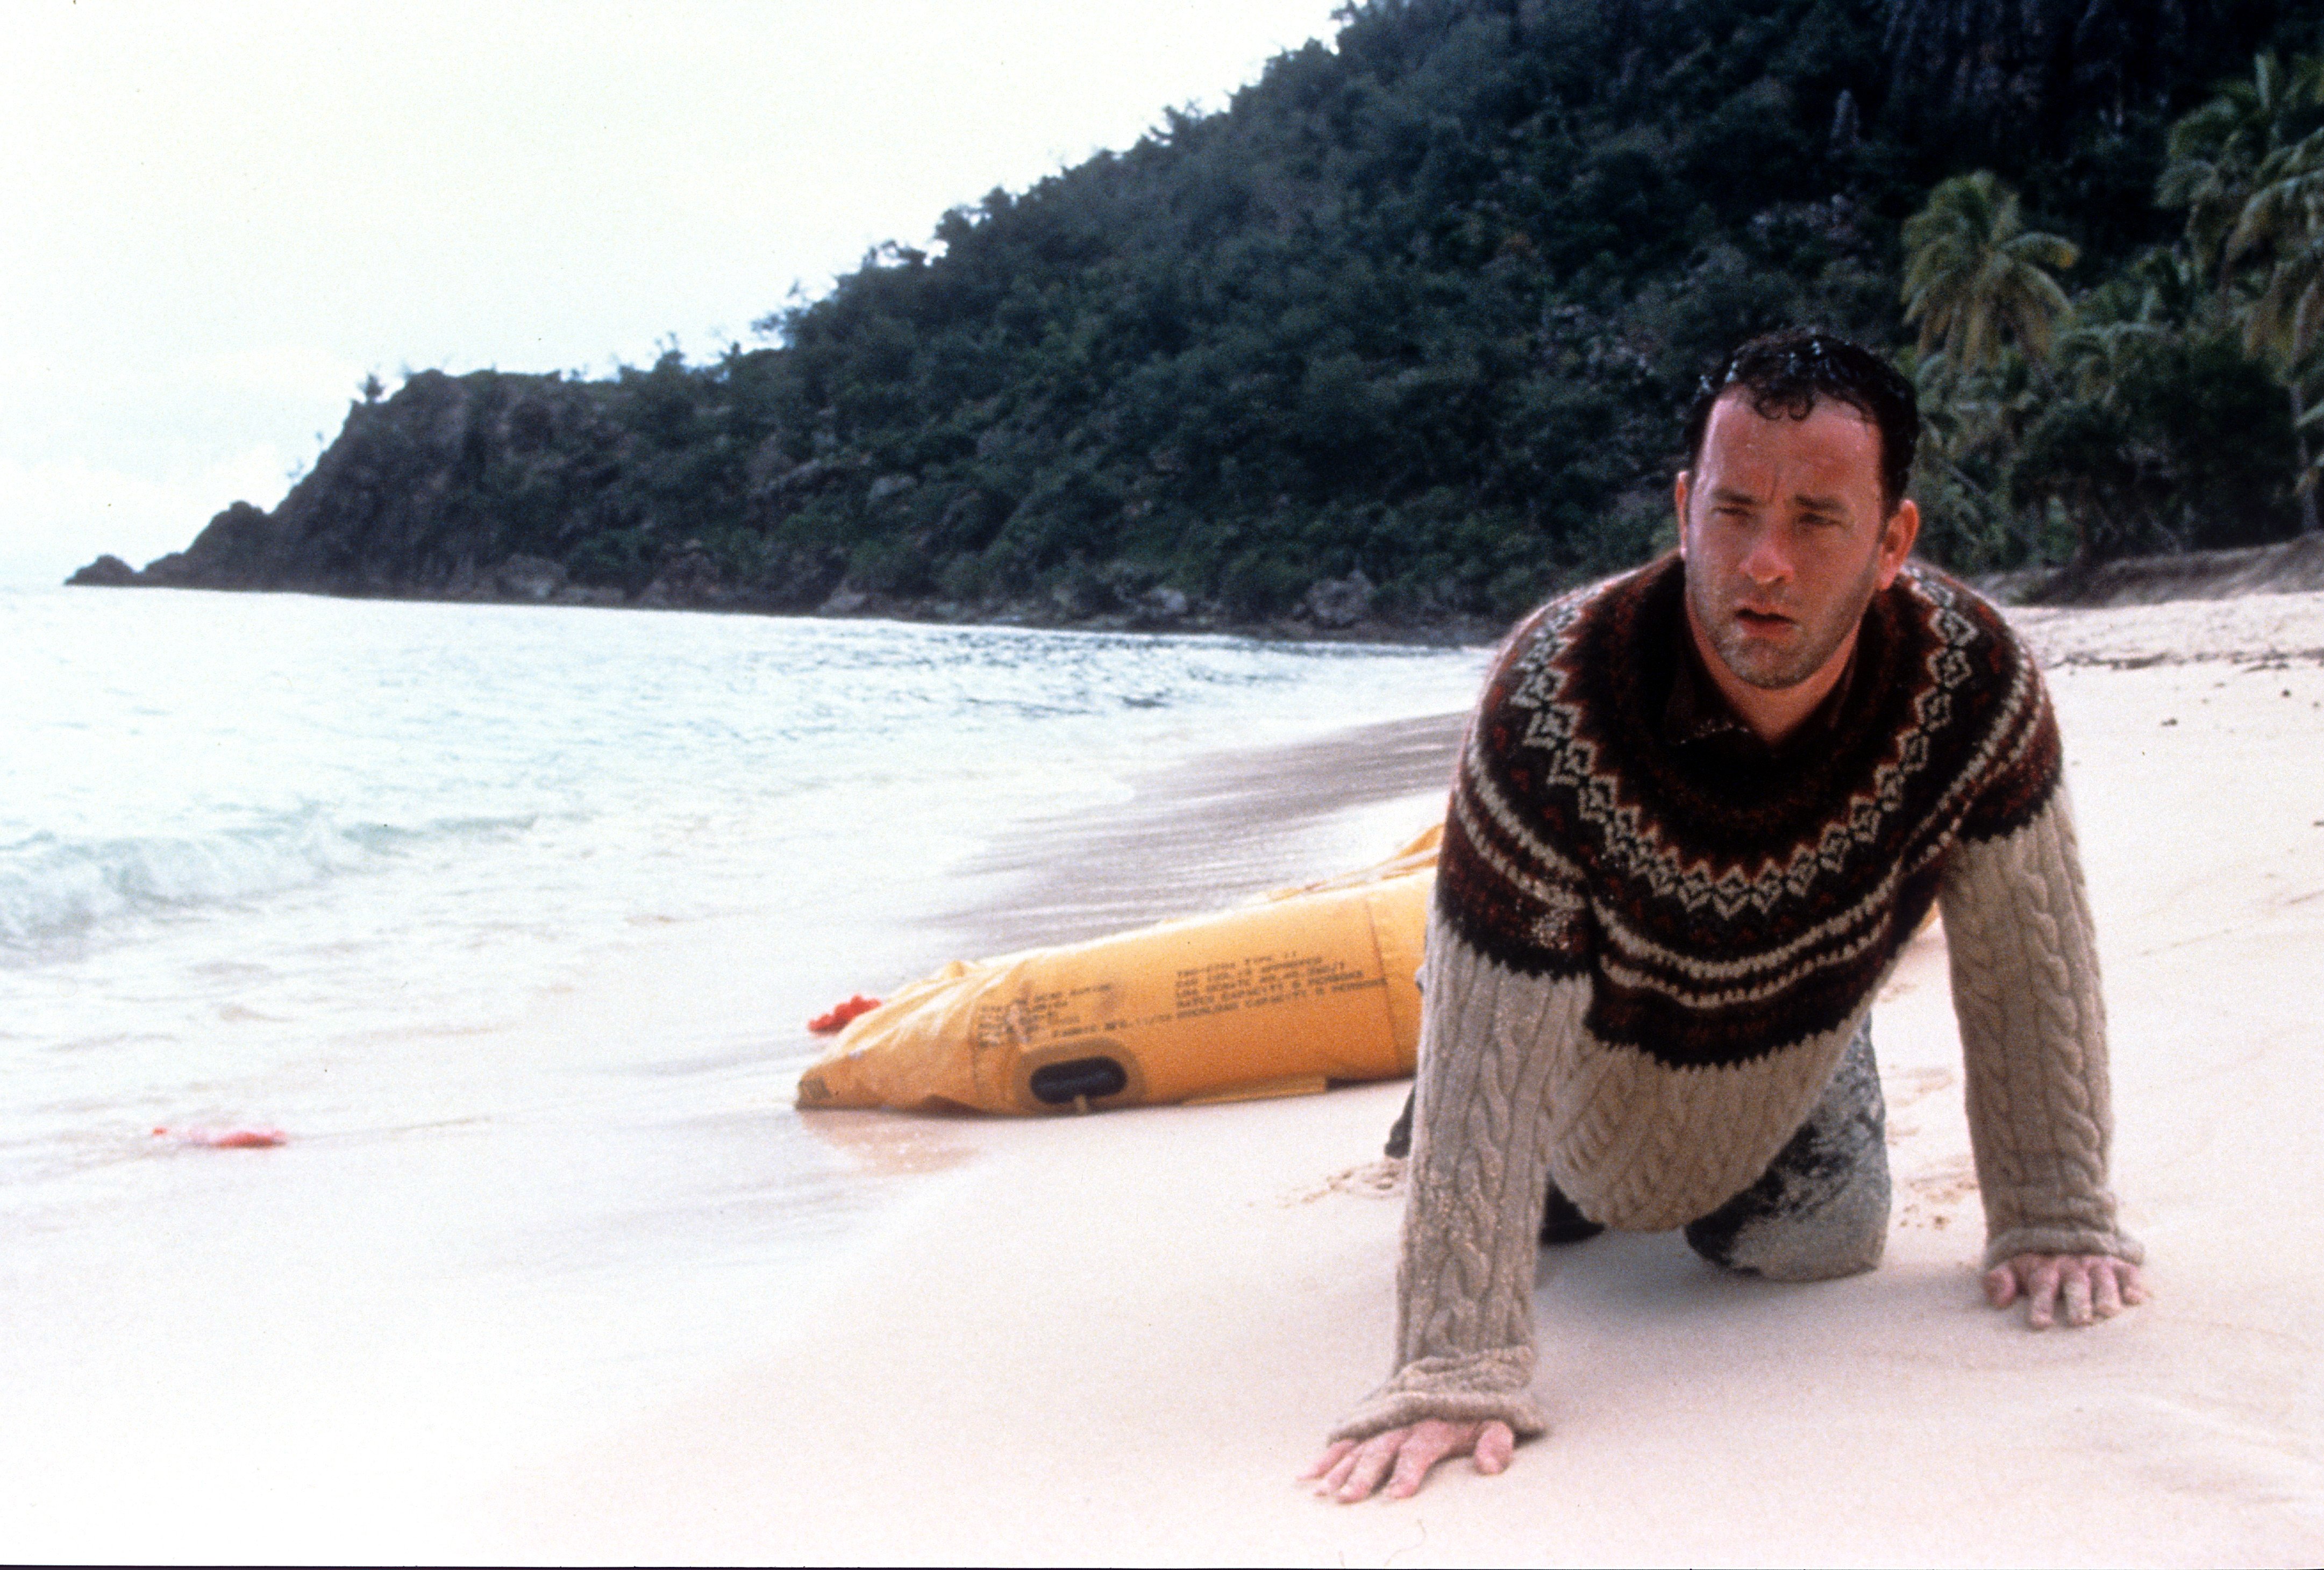 ‘Cast Away’: What Island Was the Tom Hanks Movie Filmed On?